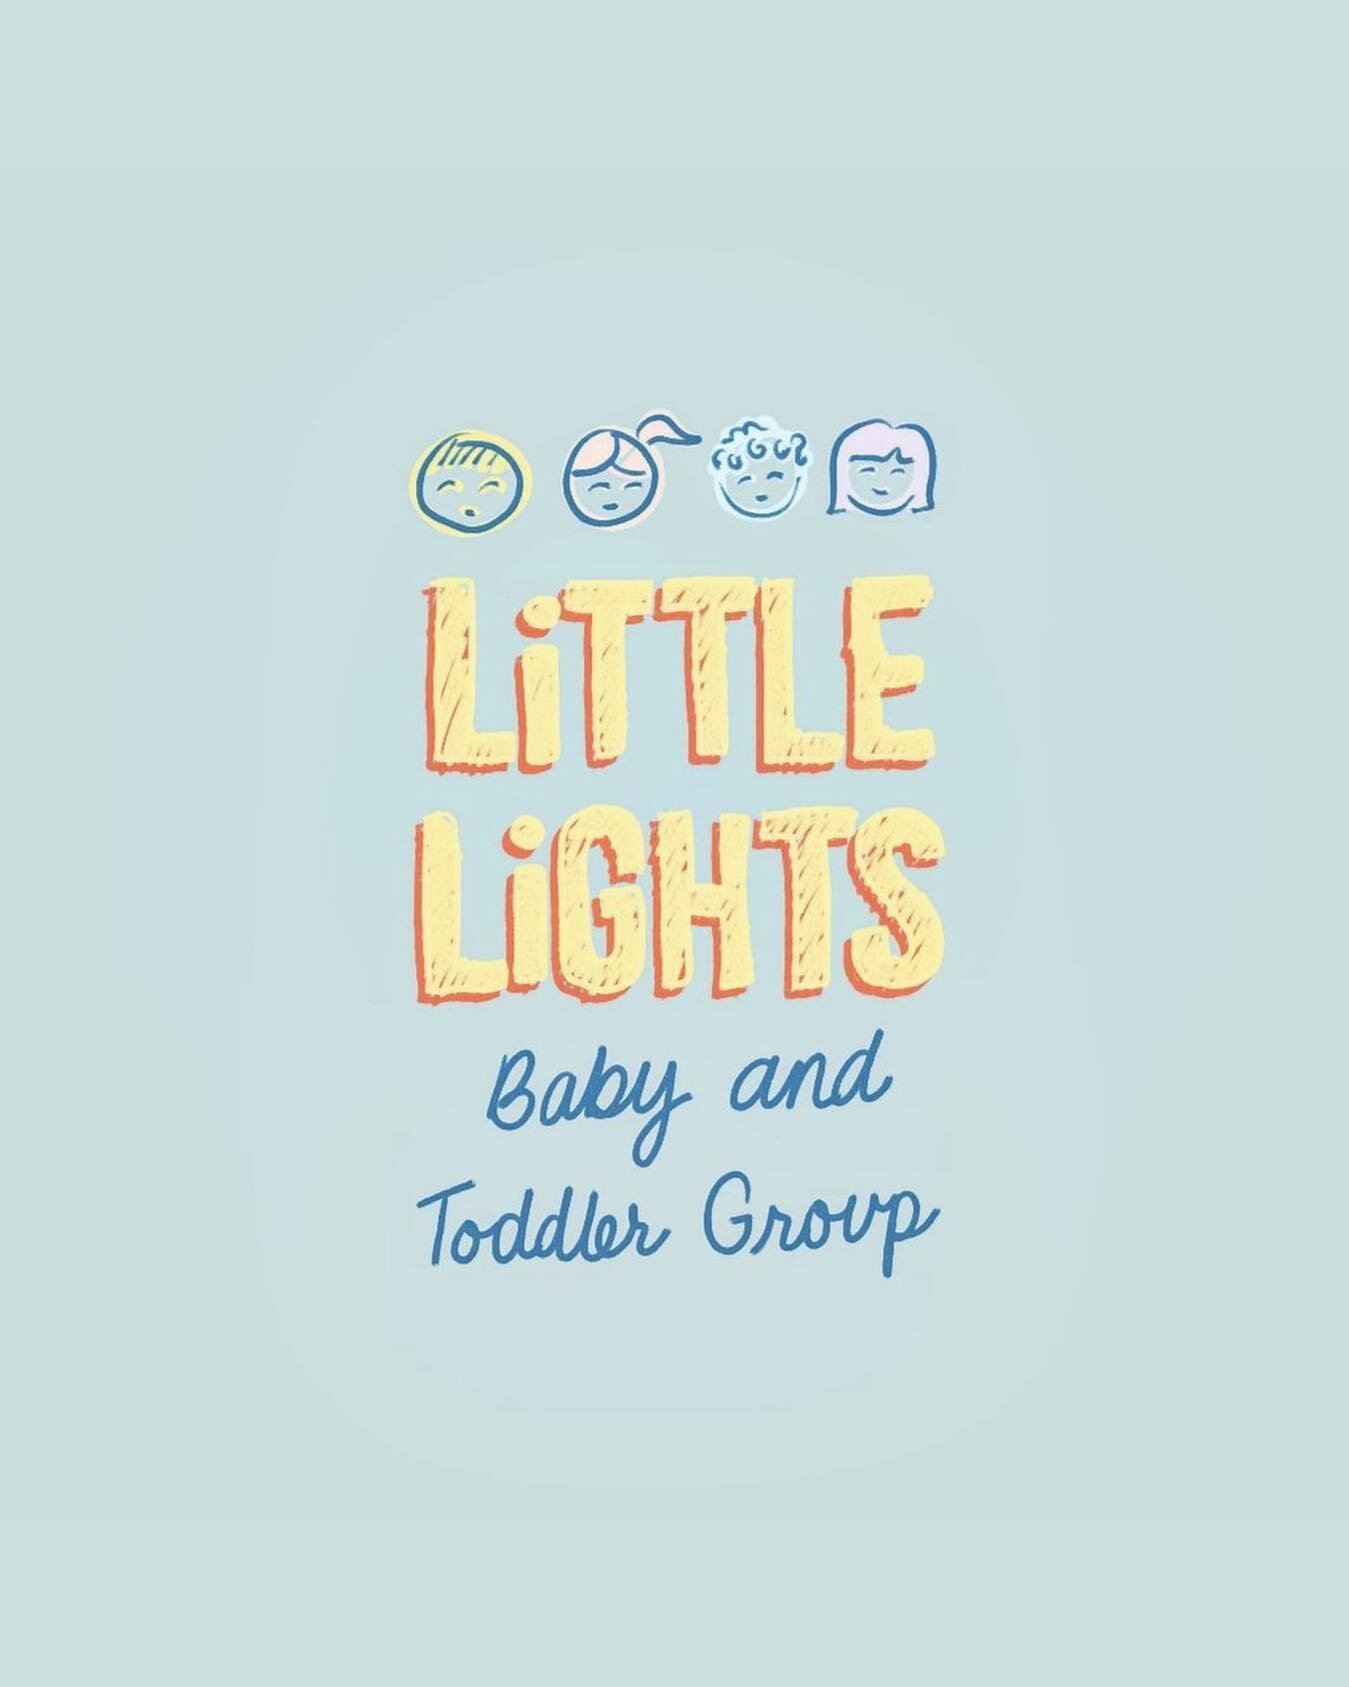 We&rsquo;re looking forward to our first Little Lights back since the break!! 

We are resuming our Baby &amp; Toddler group on the 1st and 3rd Thursday of the month. From 10:00am to 11:30am

Book online: thelighthouse.org.uk/kids-youth (link in bio)